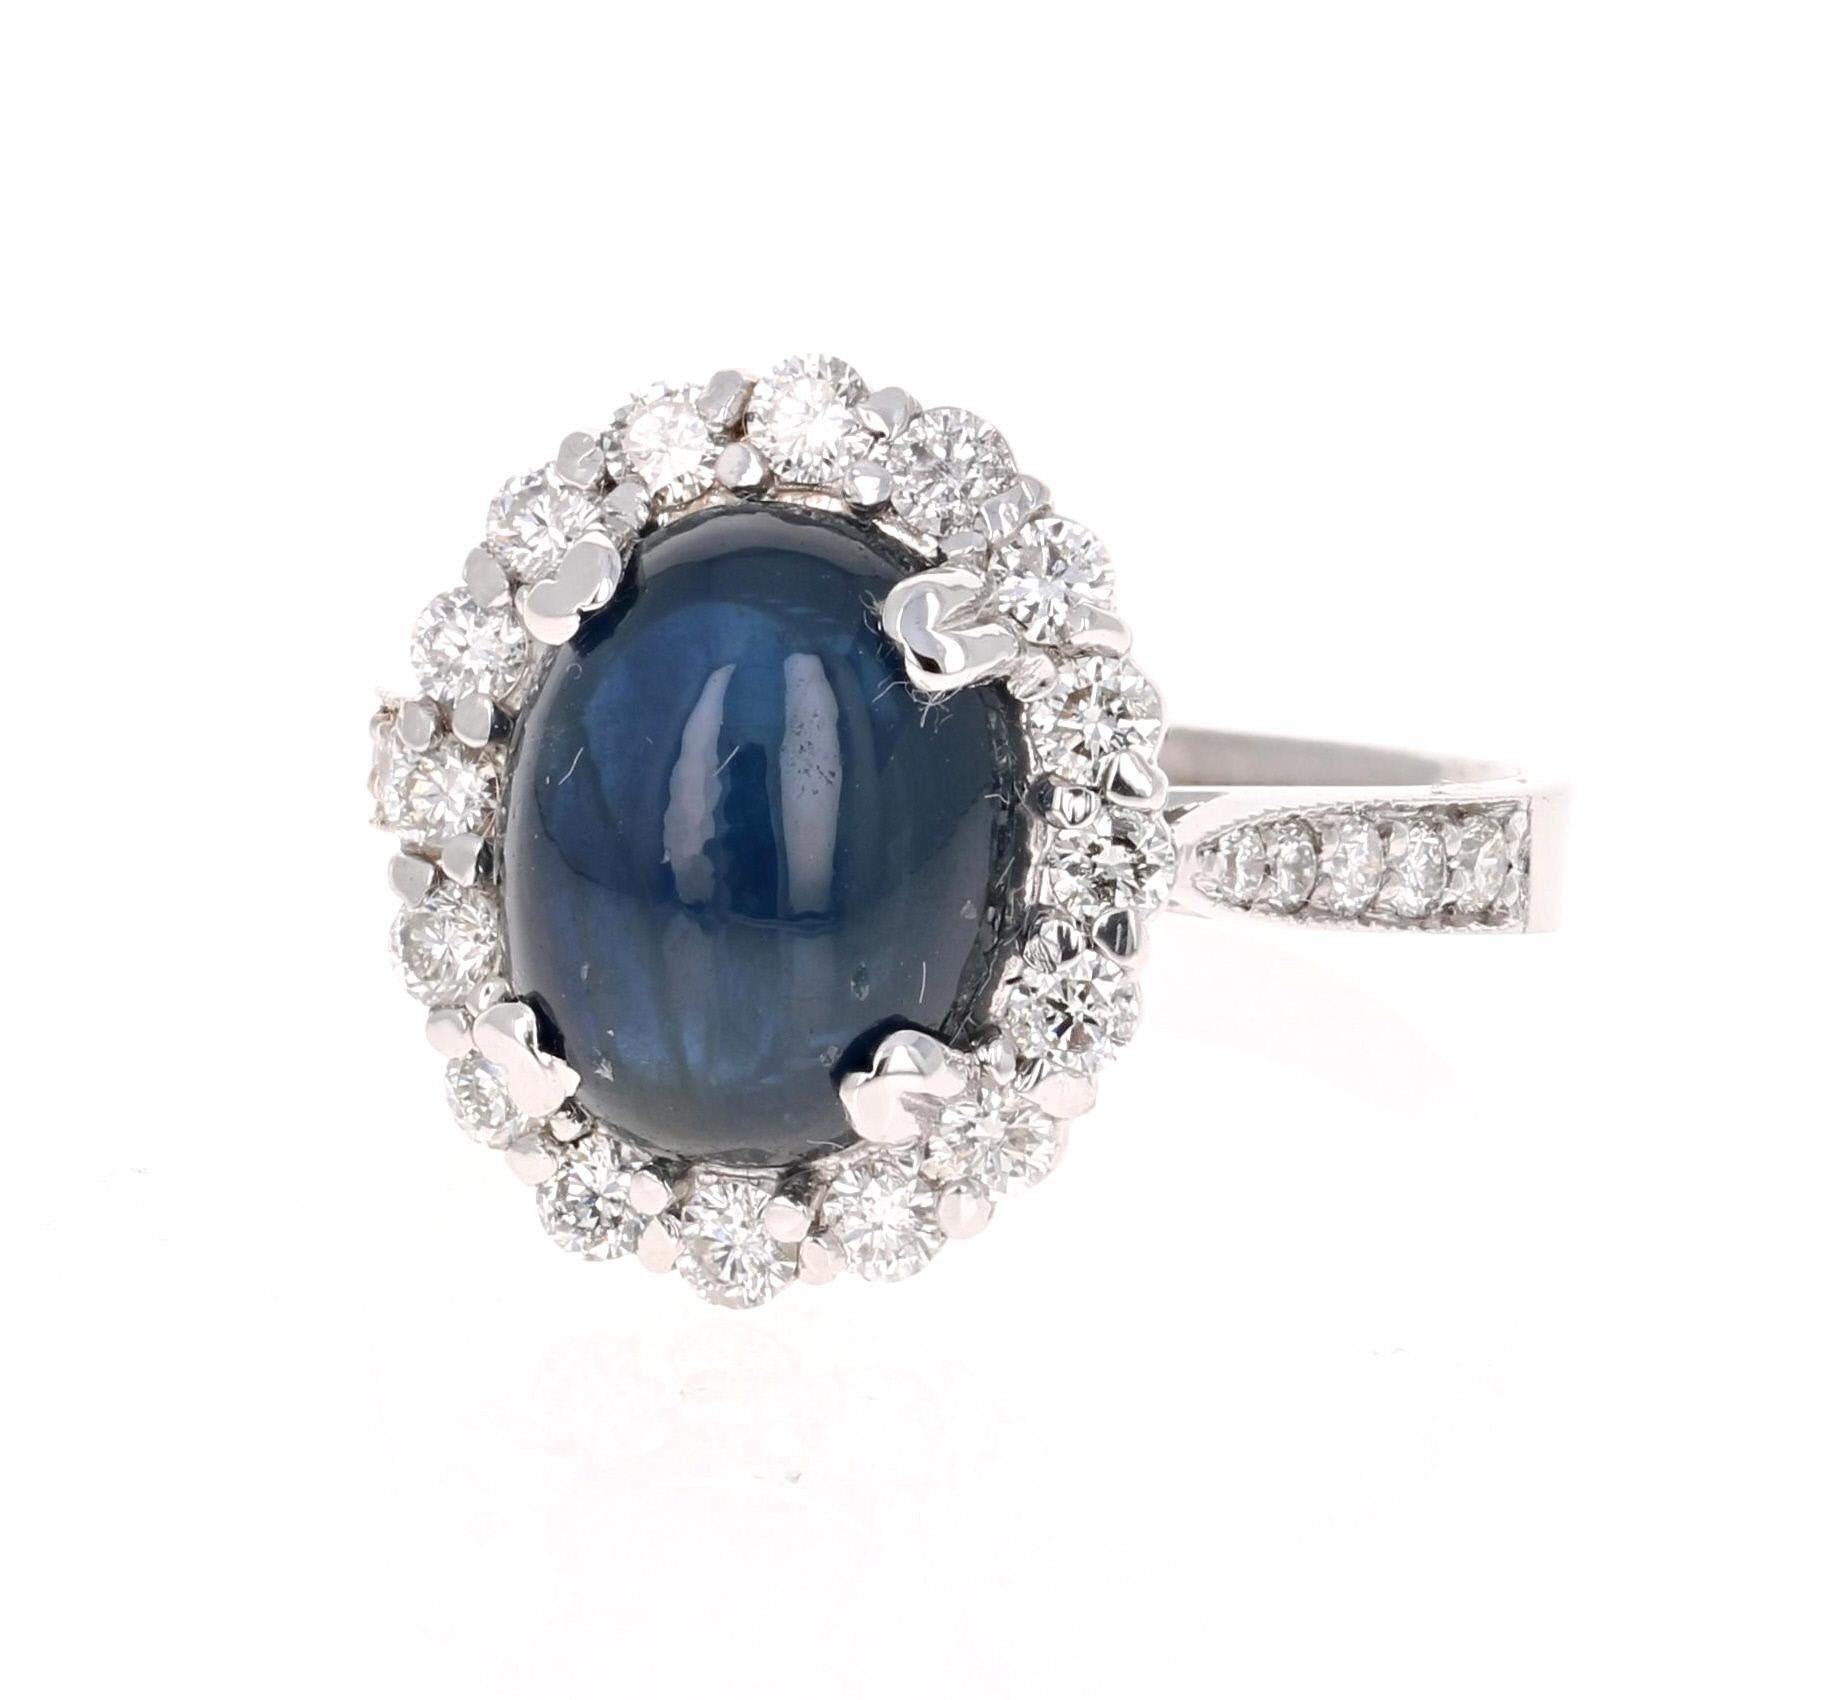 6.16 Carat Sapphire Diamond 18 Karat White Gold Bridal Ring

Beautiful and Charming Cabochon Cut Sapphire Diamond Ring! This ring has a stunning Oval Cabochon Cut Blue Sapphire that weighs 5.40 carats. The Sapphire is surrounded by 26 Round Cut